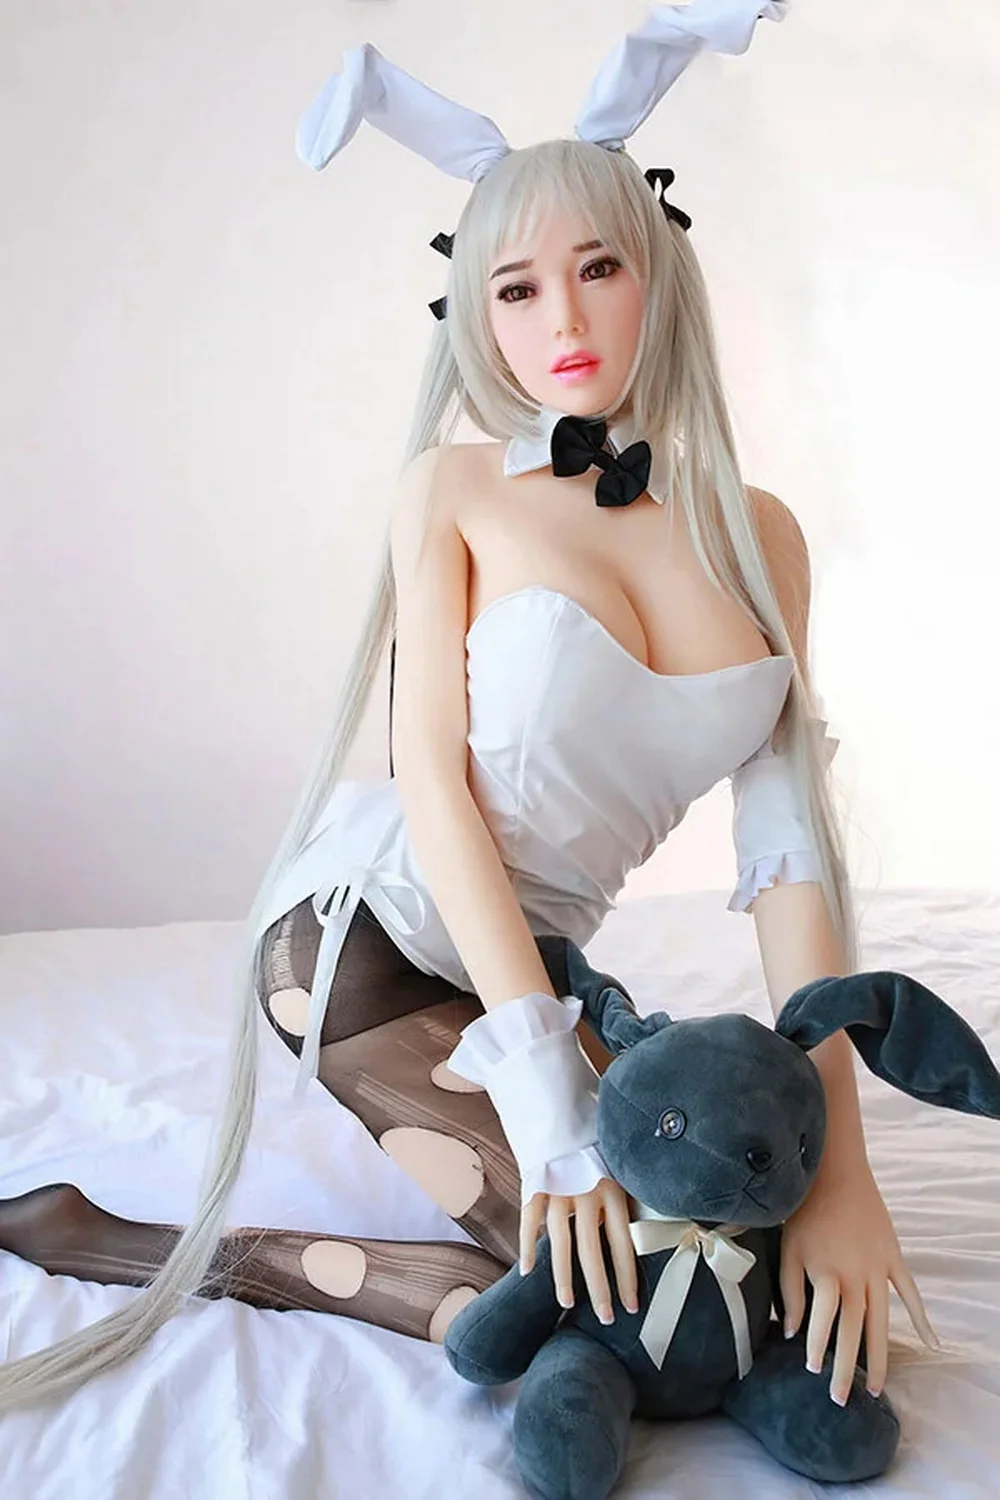 Anime sex doll with legs kneeling on the ground holding a doll in hand